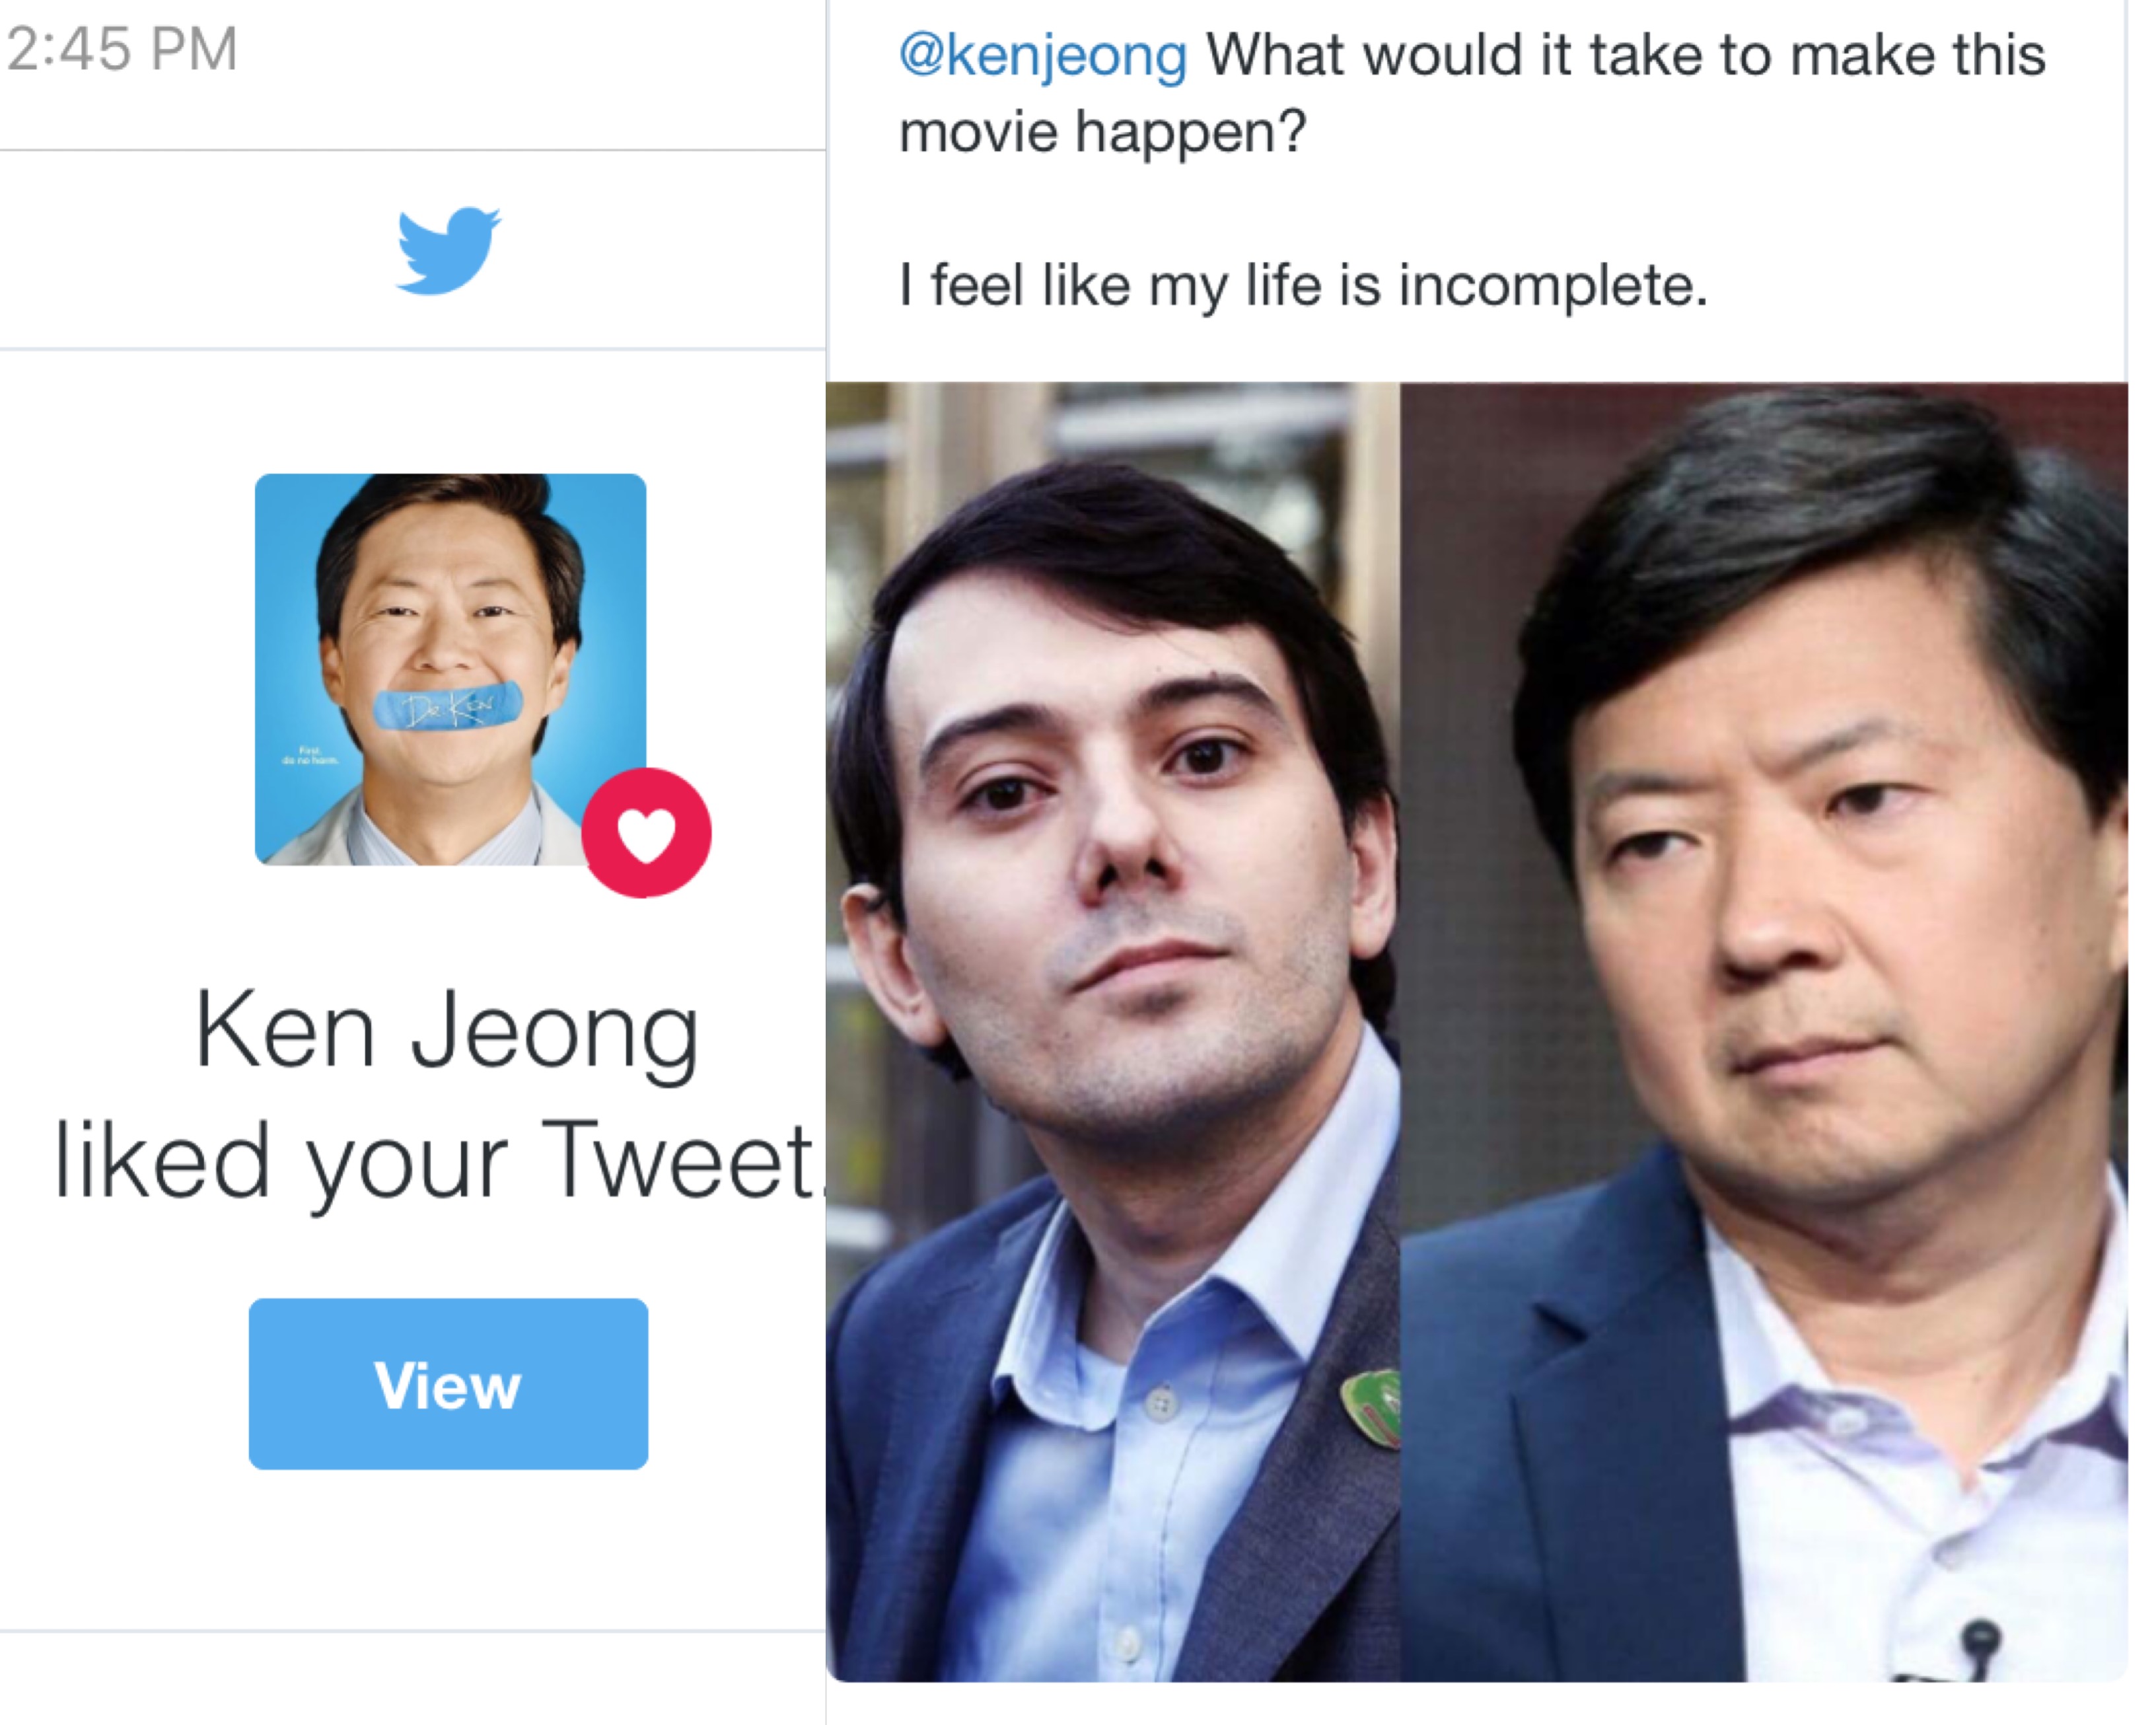 lufthansa - What would it take to make this movie happen? I feel my life is incomplete. Ken Jeong d your Tweet View